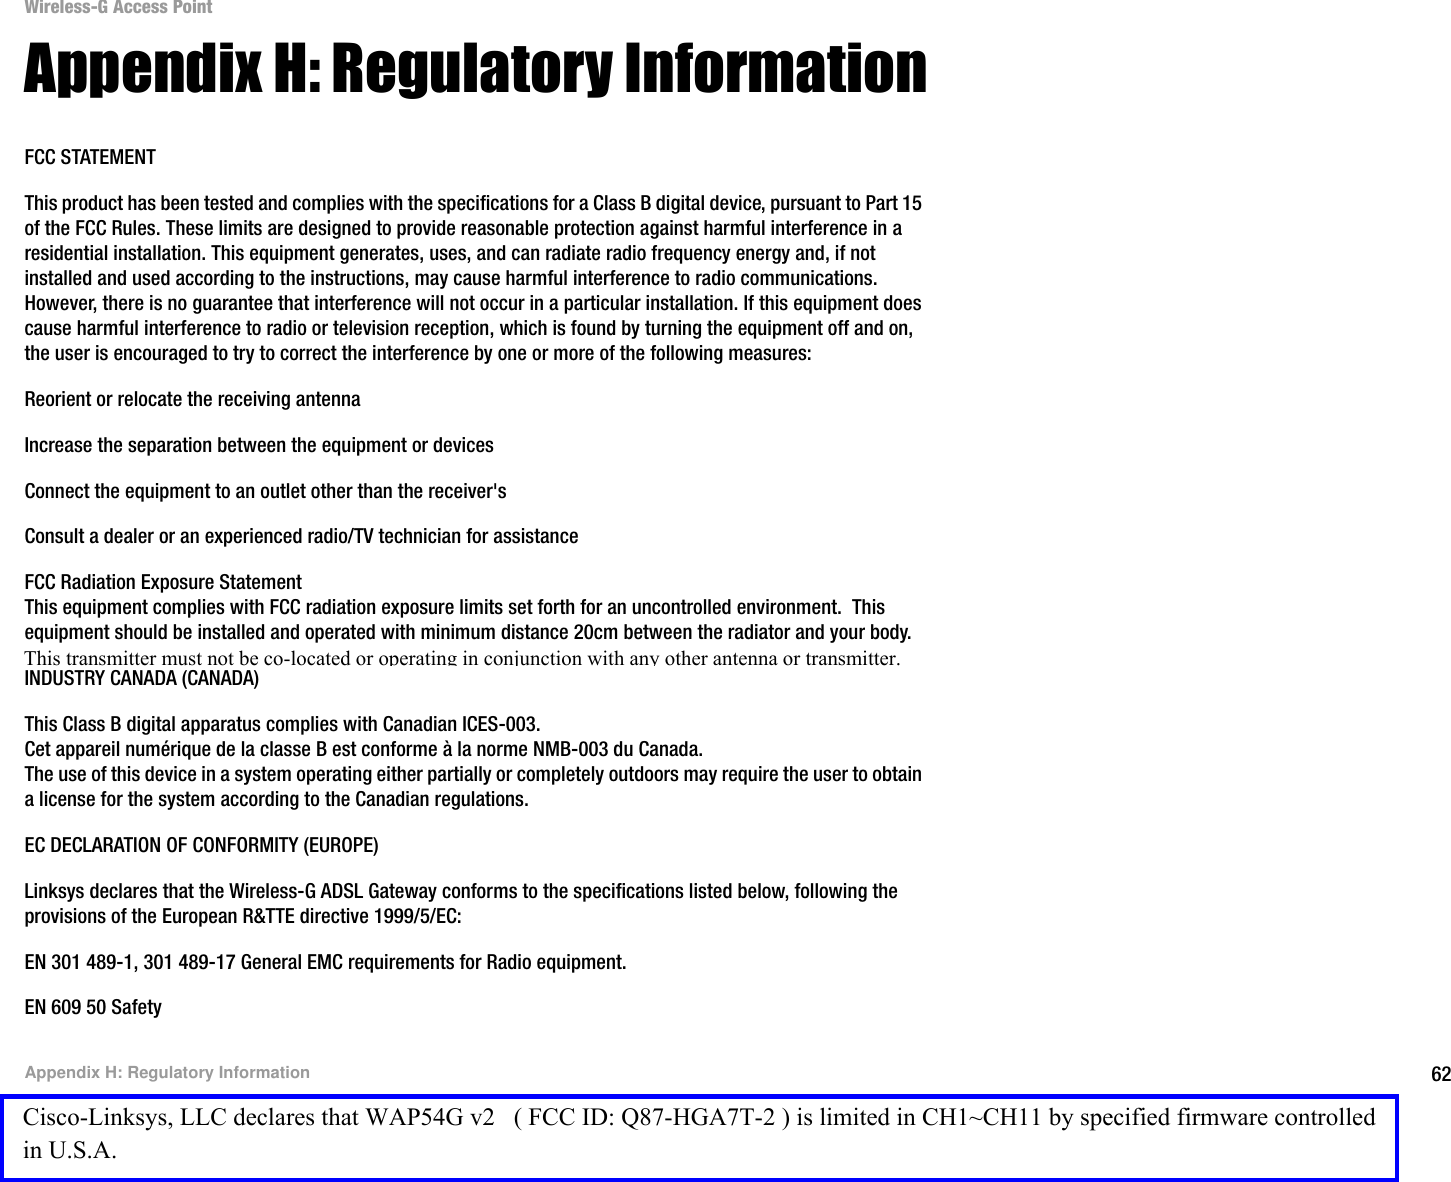 62Appendix H: Regulatory InformationWireless-G Access PointAppendix H: Regulatory InformationFCC STATEMENTThis product has been tested and complies with the specifications for a Class B digital device, pursuant to Part 15 of the FCC Rules. These limits are designed to provide reasonable protection against harmful interference in a residential installation. This equipment generates, uses, and can radiate radio frequency energy and, if not installed and used according to the instructions, may cause harmful interference to radio communications. However, there is no guarantee that interference will not occur in a particular installation. If this equipment does cause harmful interference to radio or television reception, which is found by turning the equipment off and on, the user is encouraged to try to correct the interference by one or more of the following measures:Reorient or relocate the receiving antennaIncrease the separation between the equipment or devicesConnect the equipment to an outlet other than the receiver&apos;sConsult a dealer or an experienced radio/TV technician for assistanceFCC Radiation Exposure StatementThis equipment complies with FCC radiation exposure limits set forth for an uncontrolled environment.  This equipment should be installed and operated with minimum distance 20cm between the radiator and your body.INDUSTRY CANADA (CANADA)This Class B digital apparatus complies with Canadian ICES-003.Cet appareil numérique de la classe B est conforme à la norme NMB-003 du Canada.The use of this device in a system operating either partially or completely outdoors may require the user to obtain a license for the system according to the Canadian regulations.EC DECLARATION OF CONFORMITY (EUROPE)Linksys declares that the Wireless-G ADSL Gateway conforms to the specifications listed below, following the provisions of the European R&amp;TTE directive 1999/5/EC: EN 301 489-1, 301 489-17 General EMC requirements for Radio equipment.EN 609 50 SafetyCisco-Linksys, LLC declares that WAP54G v2   ( FCC ID: Q87-HGA7T-2 ) is limited in CH1~CH11 by specified firmware controlled in U.S.A.This transmitter must not be co-located or operating in conjunction with any other antenna or transmitter.